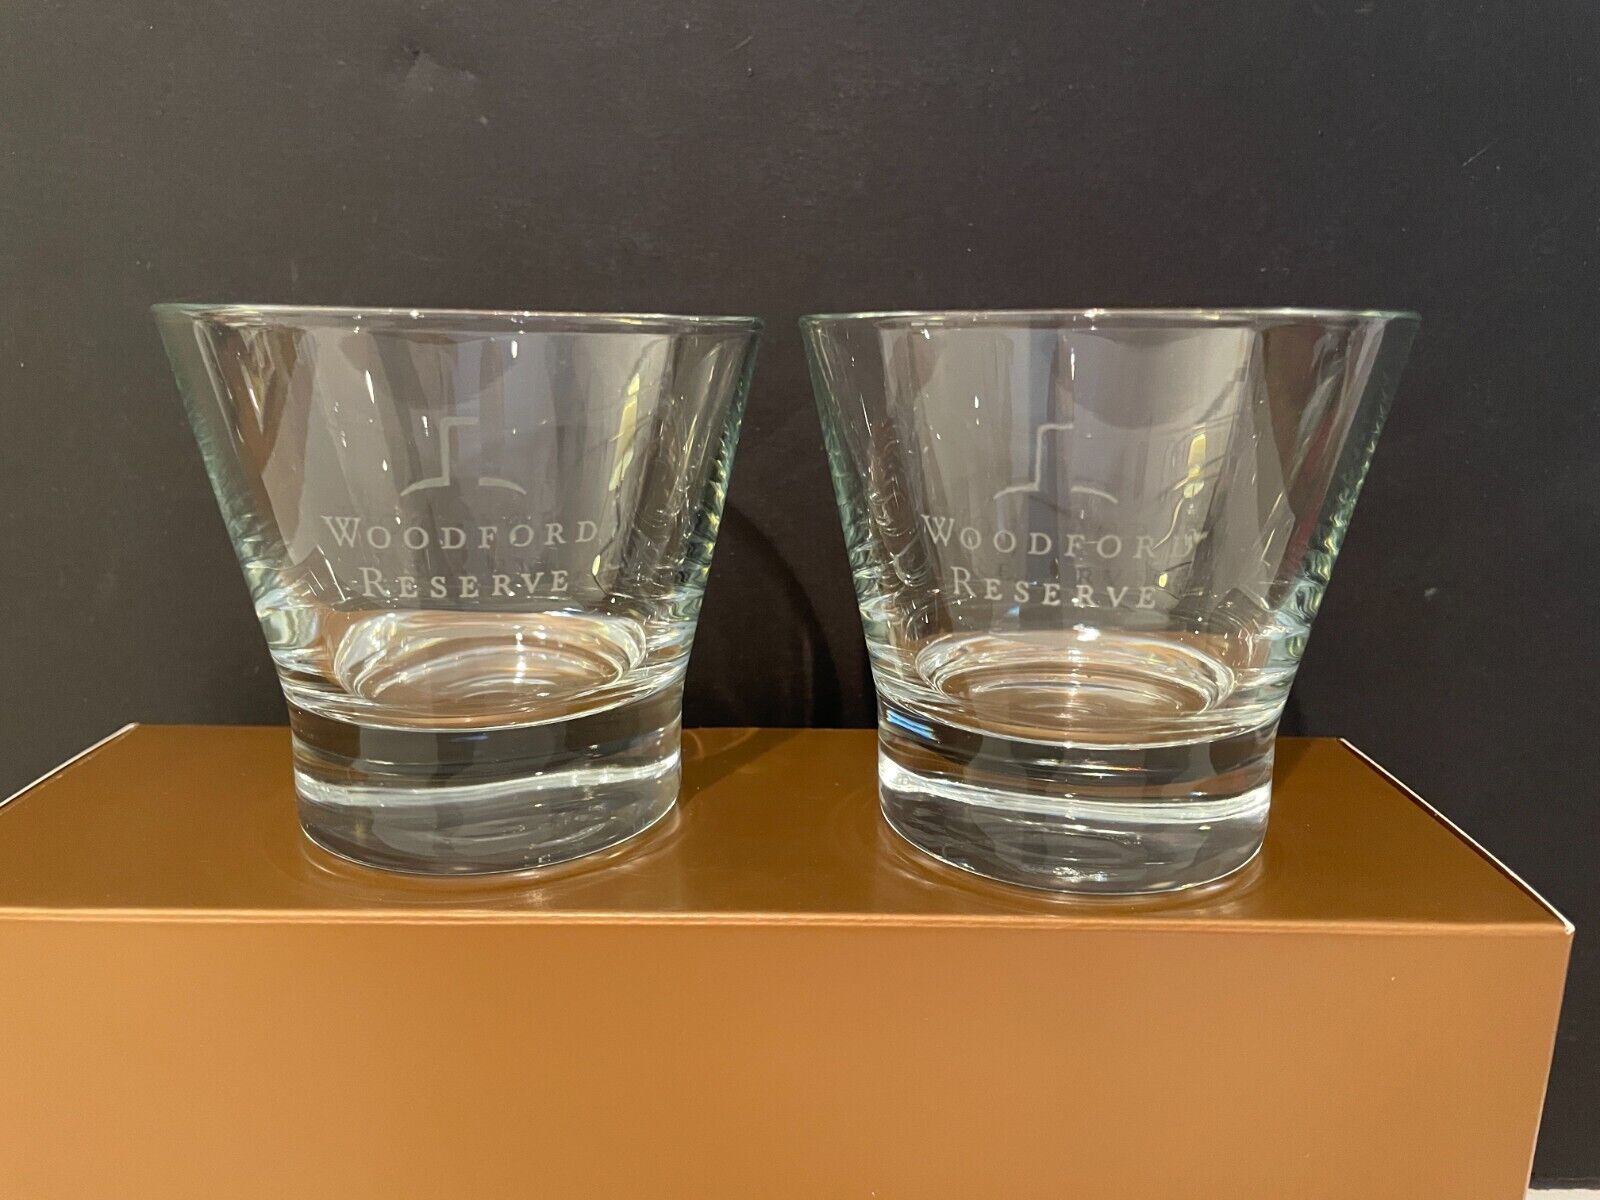 Two (2) Etched Woodford Reserve Bourbon Whiskey Rocks Glasses - Wide Mouth